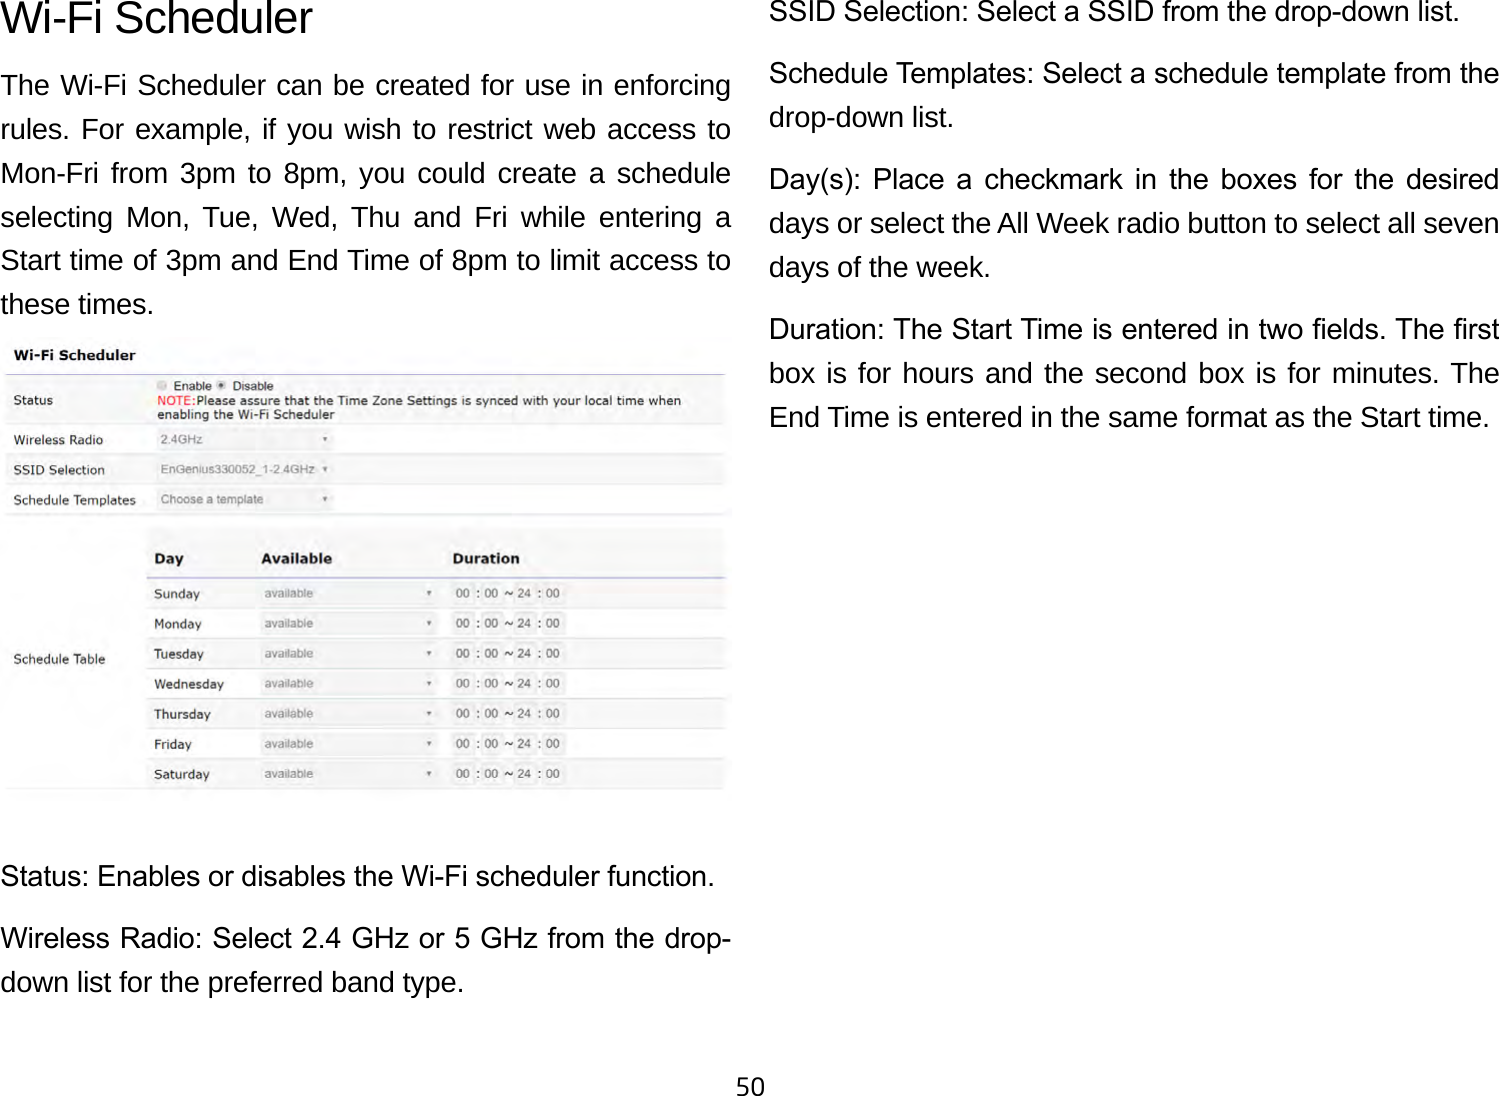 50Wi-Fi SchedulerThe Wi-Fi Scheduler can be created for use in enforcing rules. For example, if you wish to restrict web access to Mon-Fri from 3pm to 8pm, you could create a schedule selecting Mon, Tue, Wed, Thu and Fri while entering a Start time of 3pm and End Time of 8pm to limit access to these times.Status: Enables or disables the Wi-Fi scheduler function.Wireless Radio: Select 2.4 GHz or 5 GHz from the drop- down list for the preferred band type.SSID Selection: Select a SSID from the drop-down list.Schedule Templates: Select a schedule template from the drop-down list.Day(s):  Place  a  checkmark  in  the  boxes  for  the  desired days or select the All Week radio button to select all seven days of the week.Duration: The Start Time is entered in two elds. The rst box is for hours and the second box is for minutes. The End Time is entered in the same format as the Start time.